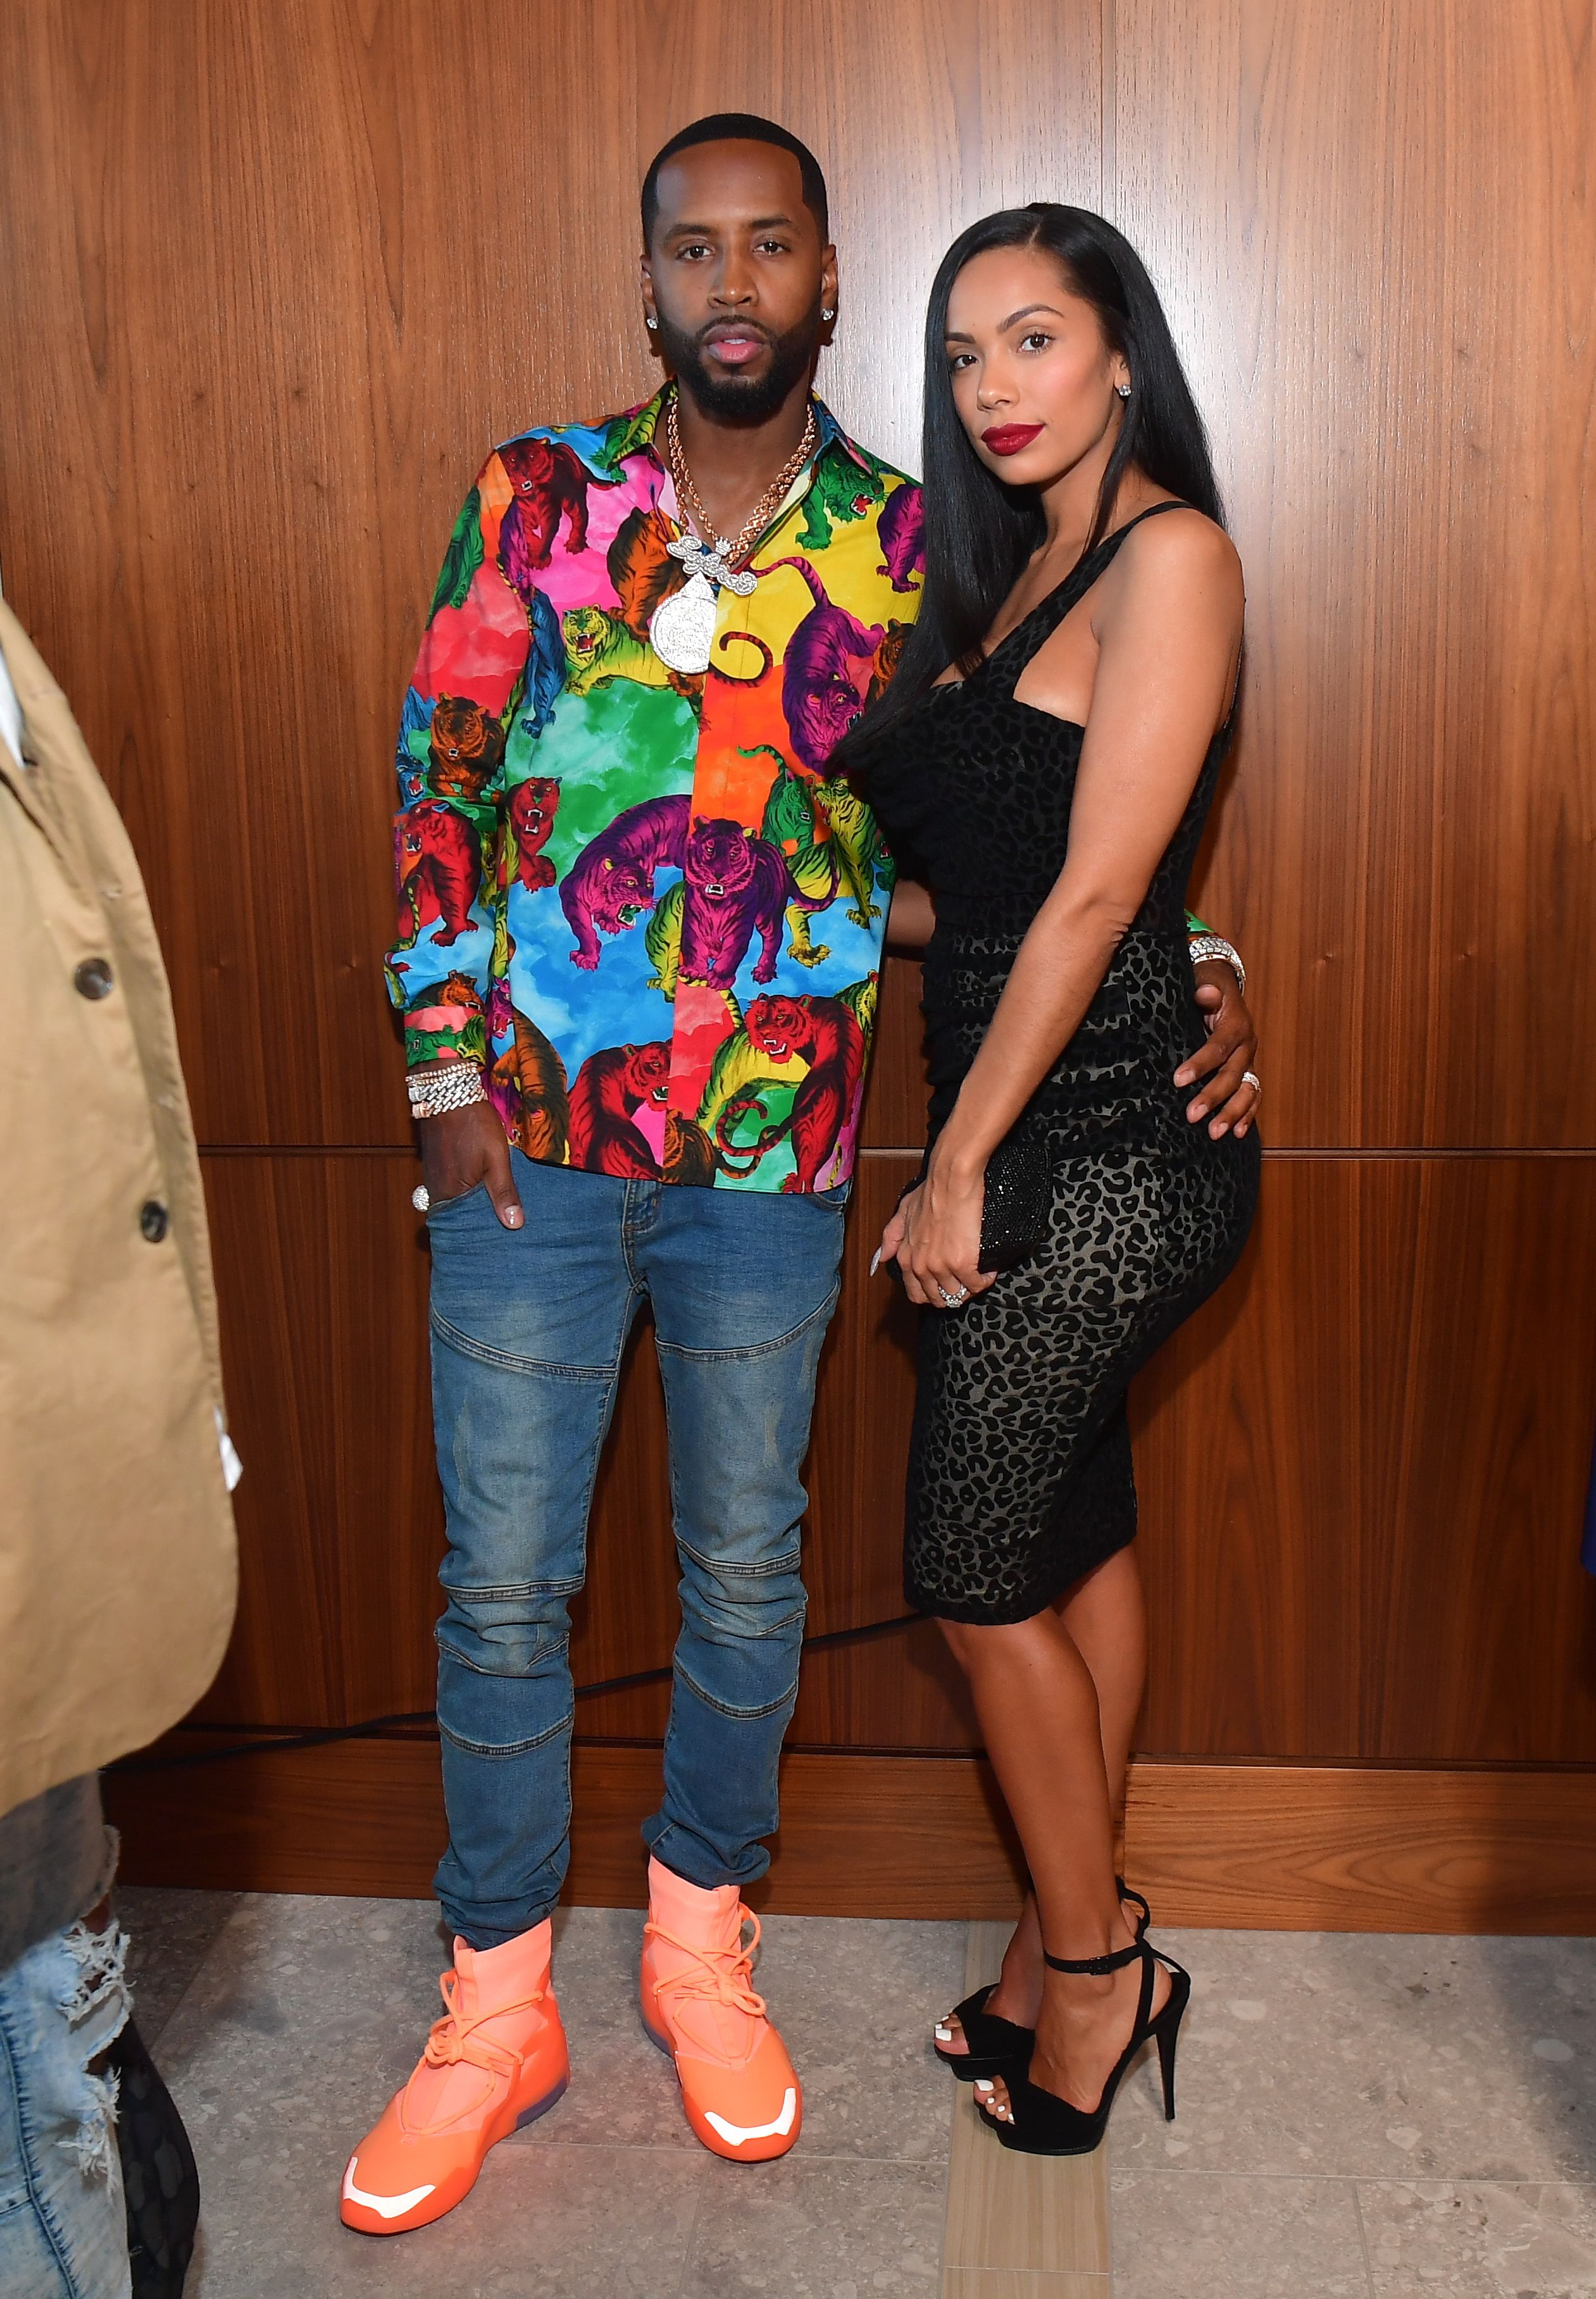 Safaree Samuels and Erica Mena at the 2019 BMI R&B/Hip-Hop Awards at Sandy Springs Performing Arts Center on August 29, 2019 | Photo: Getty Images